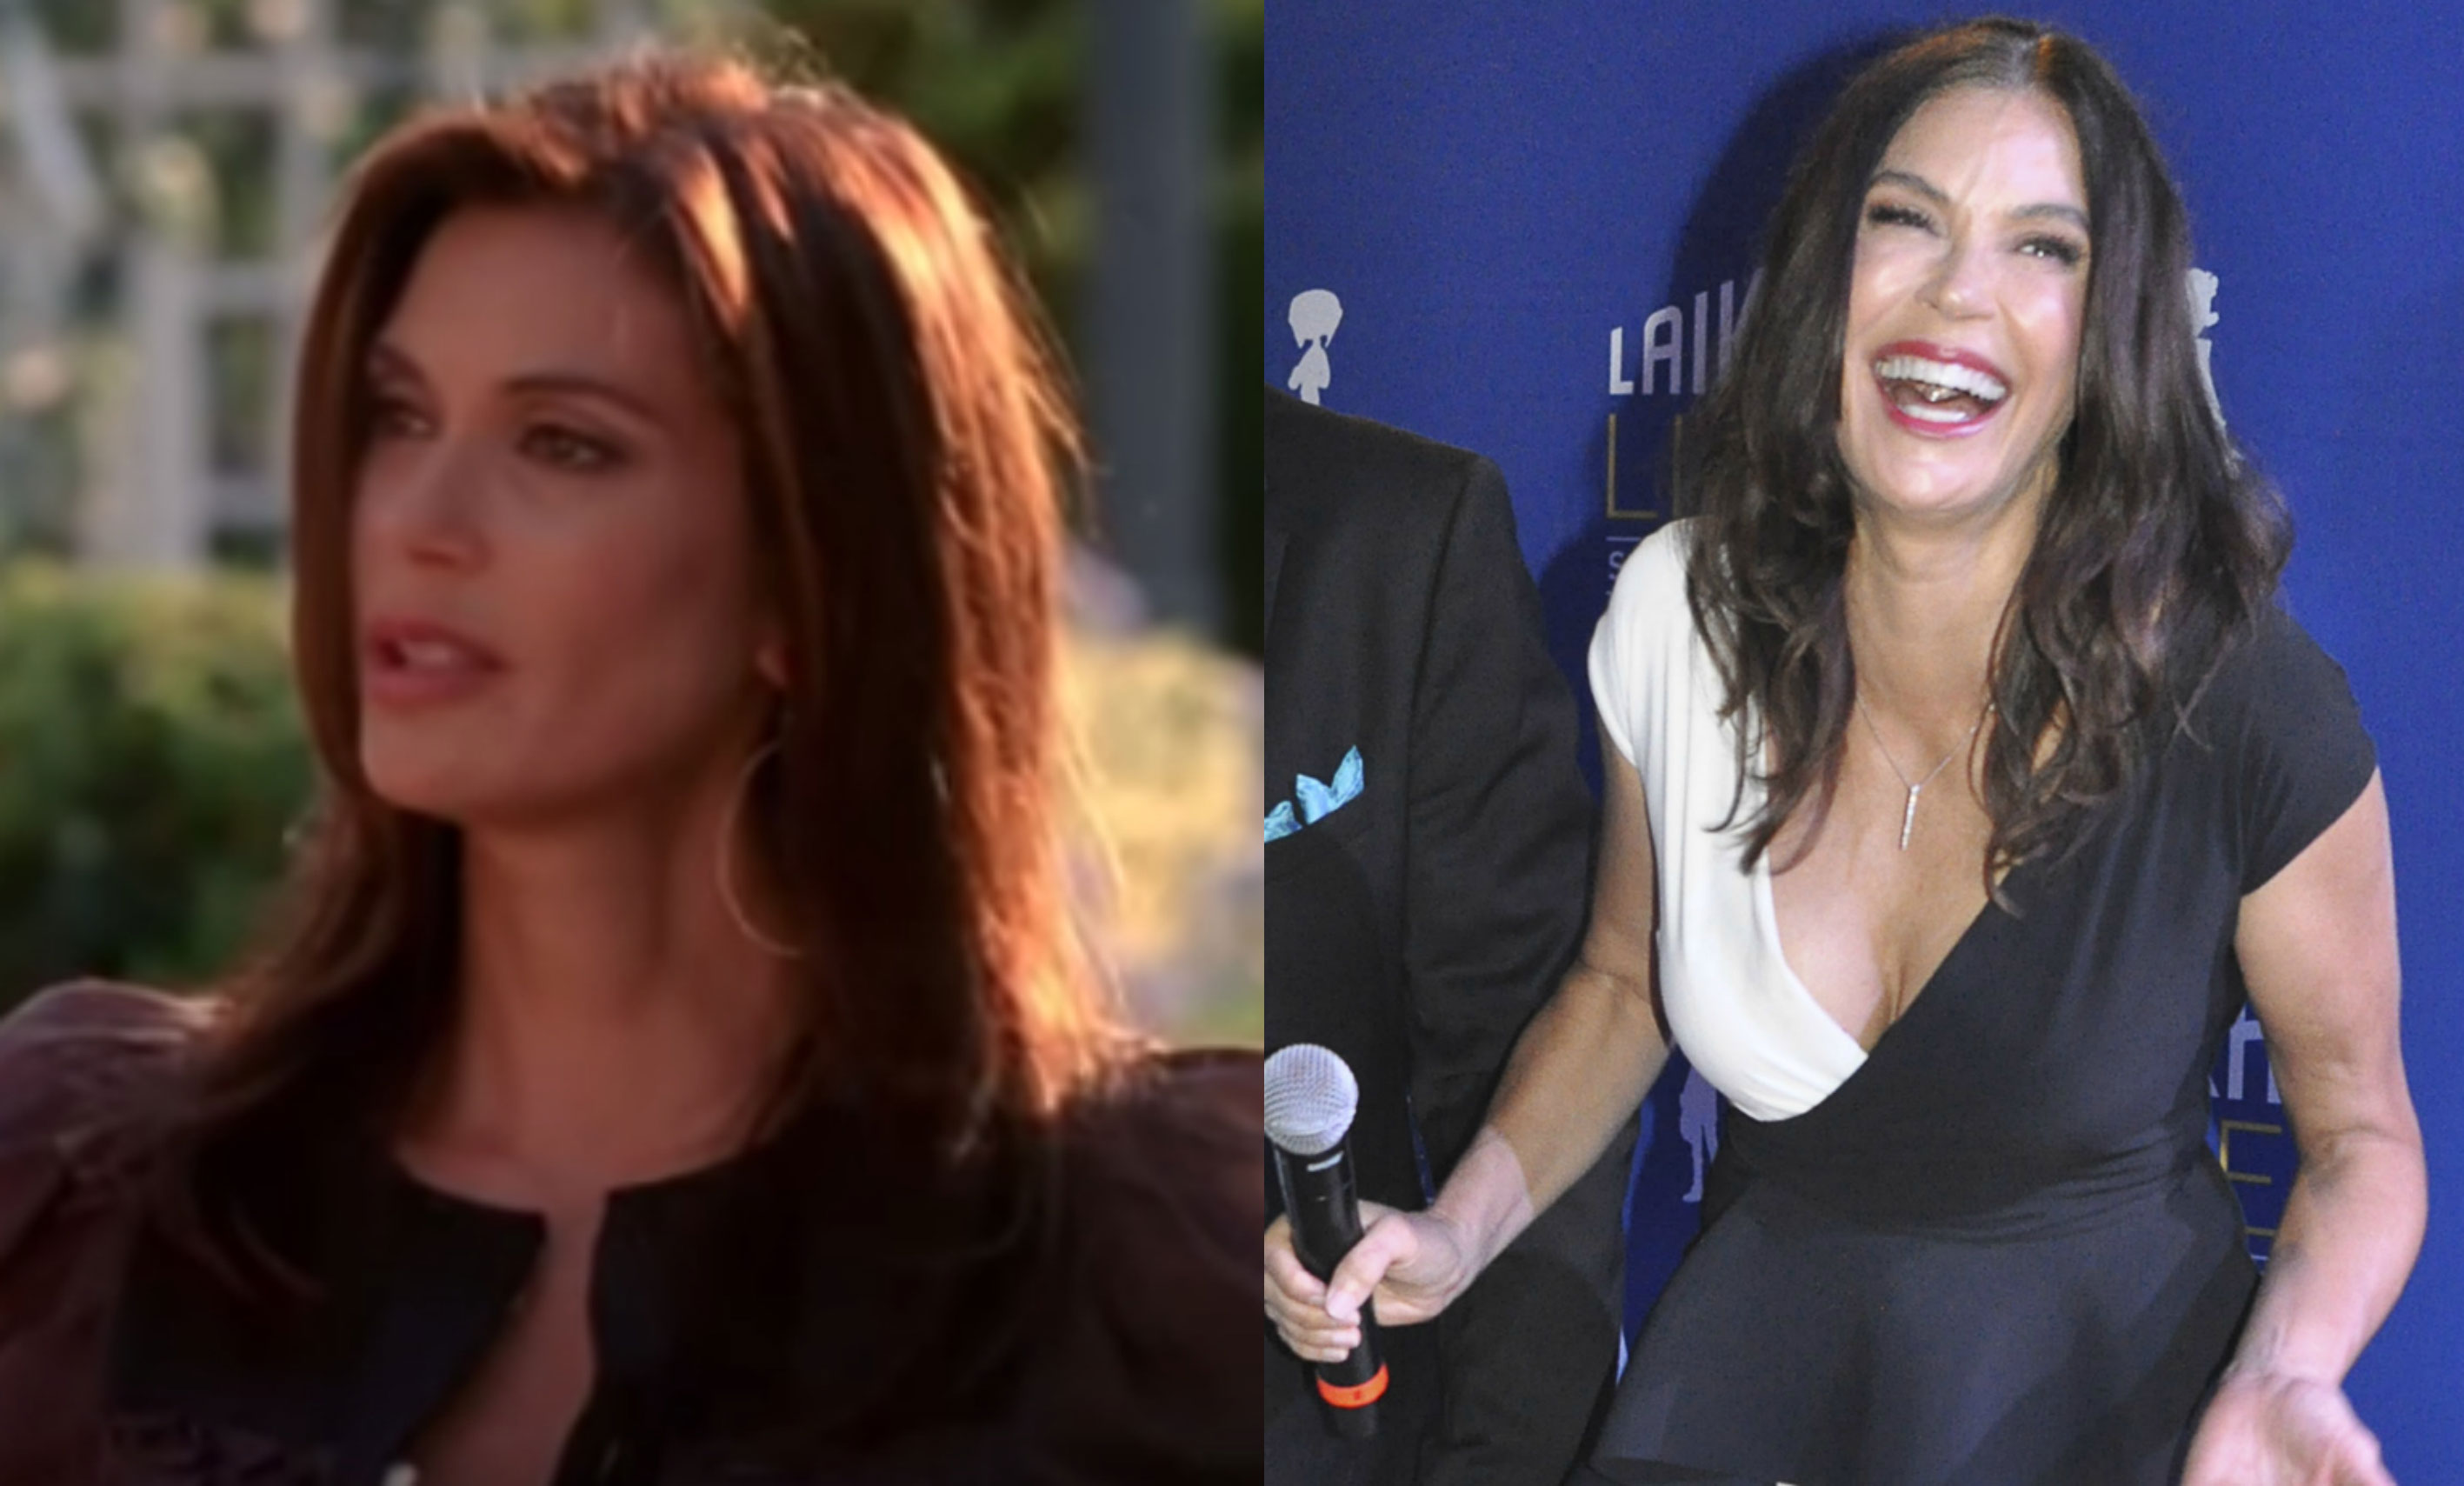 Teri Hatcher desperate housewives then and now